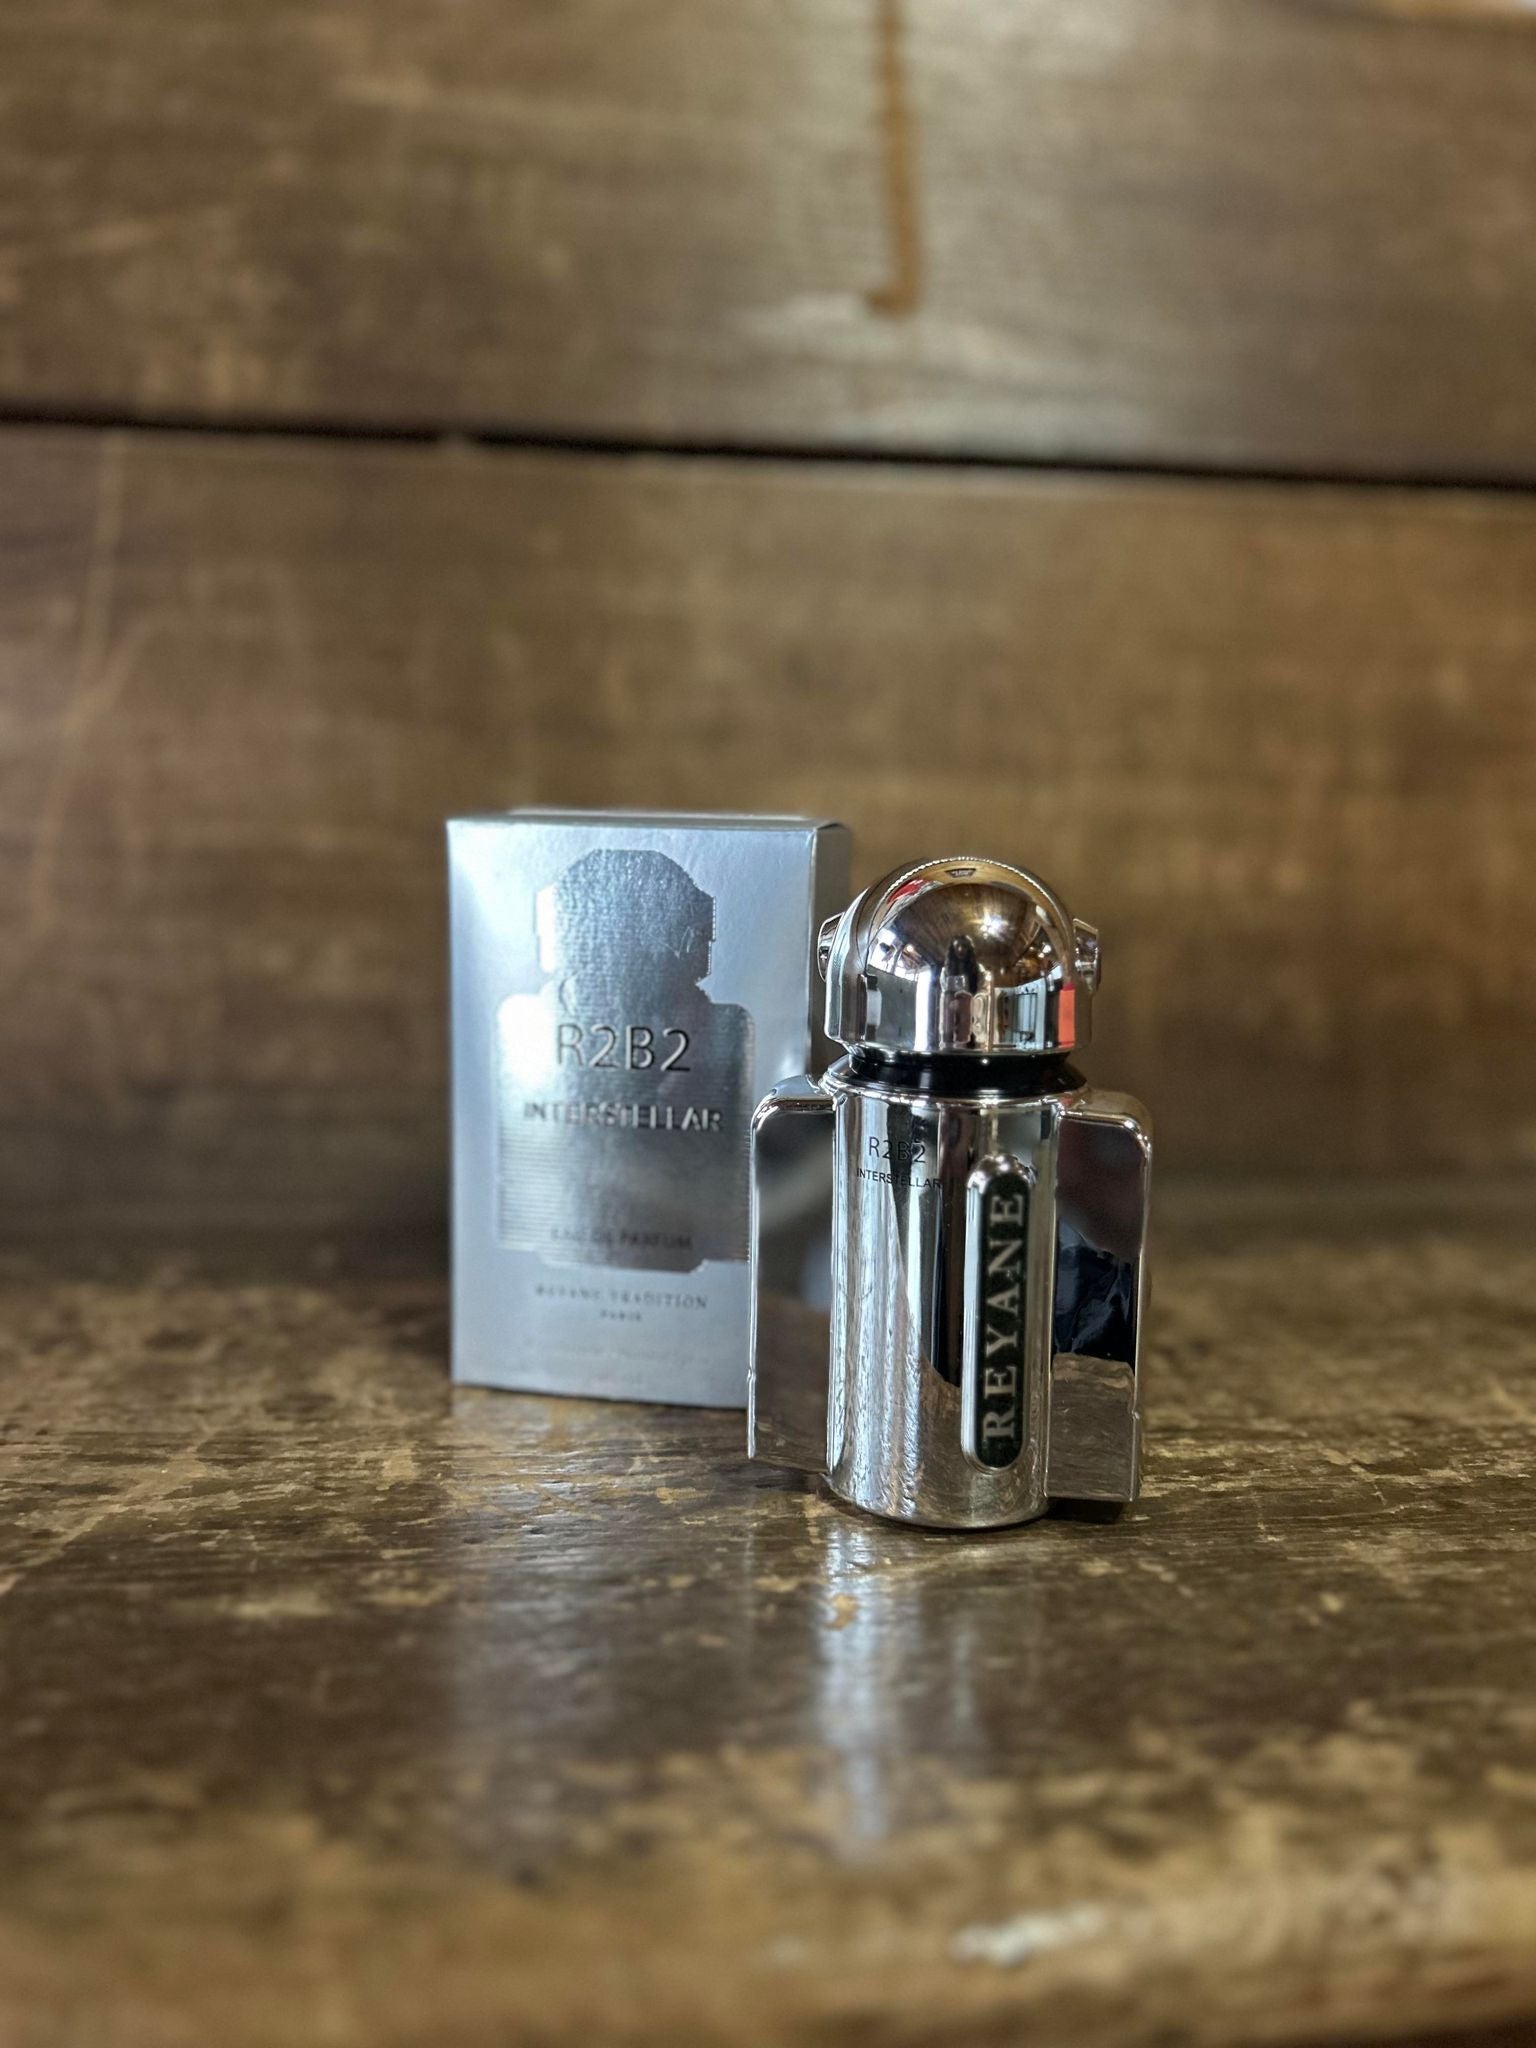 R2B2 Interstellar Men's Cologne-Men's Cologne-Darrell & Bonnie Co.-Lucky J Boots & More, Women's, Men's, & Kids Western Store Located in Carthage, MO